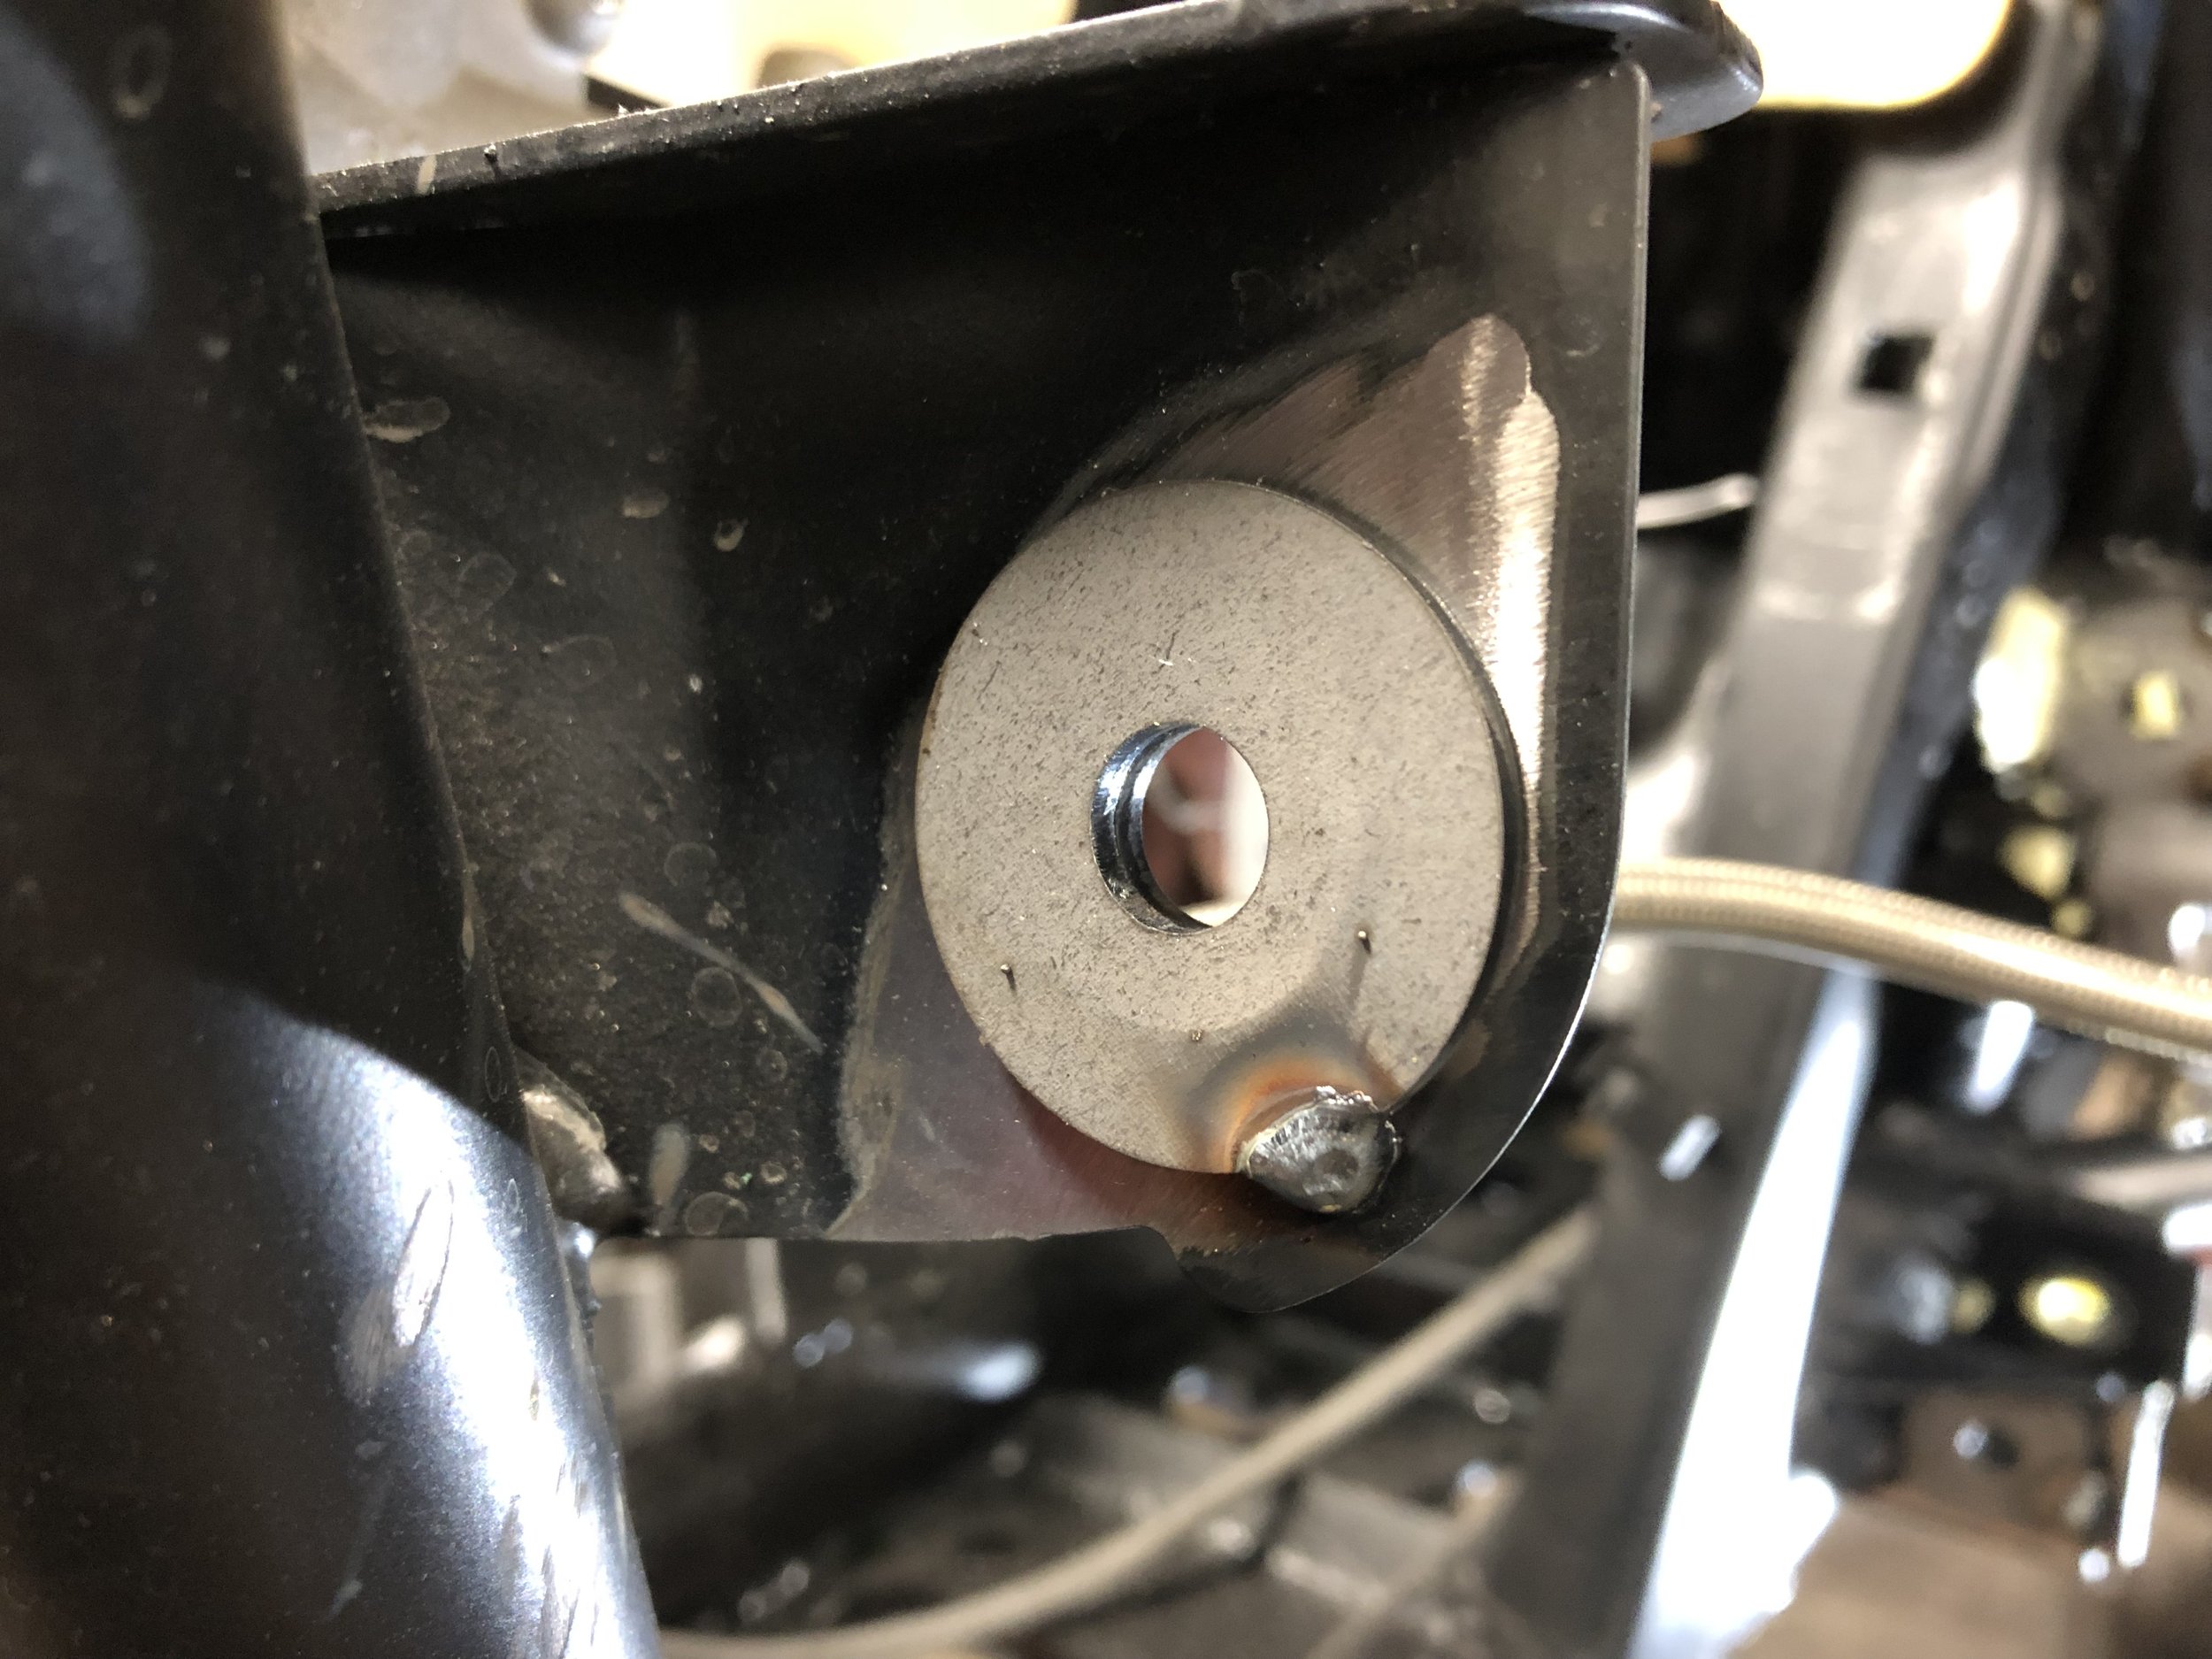  Adding support washers to strengthen a a-arm and shock mounts.  